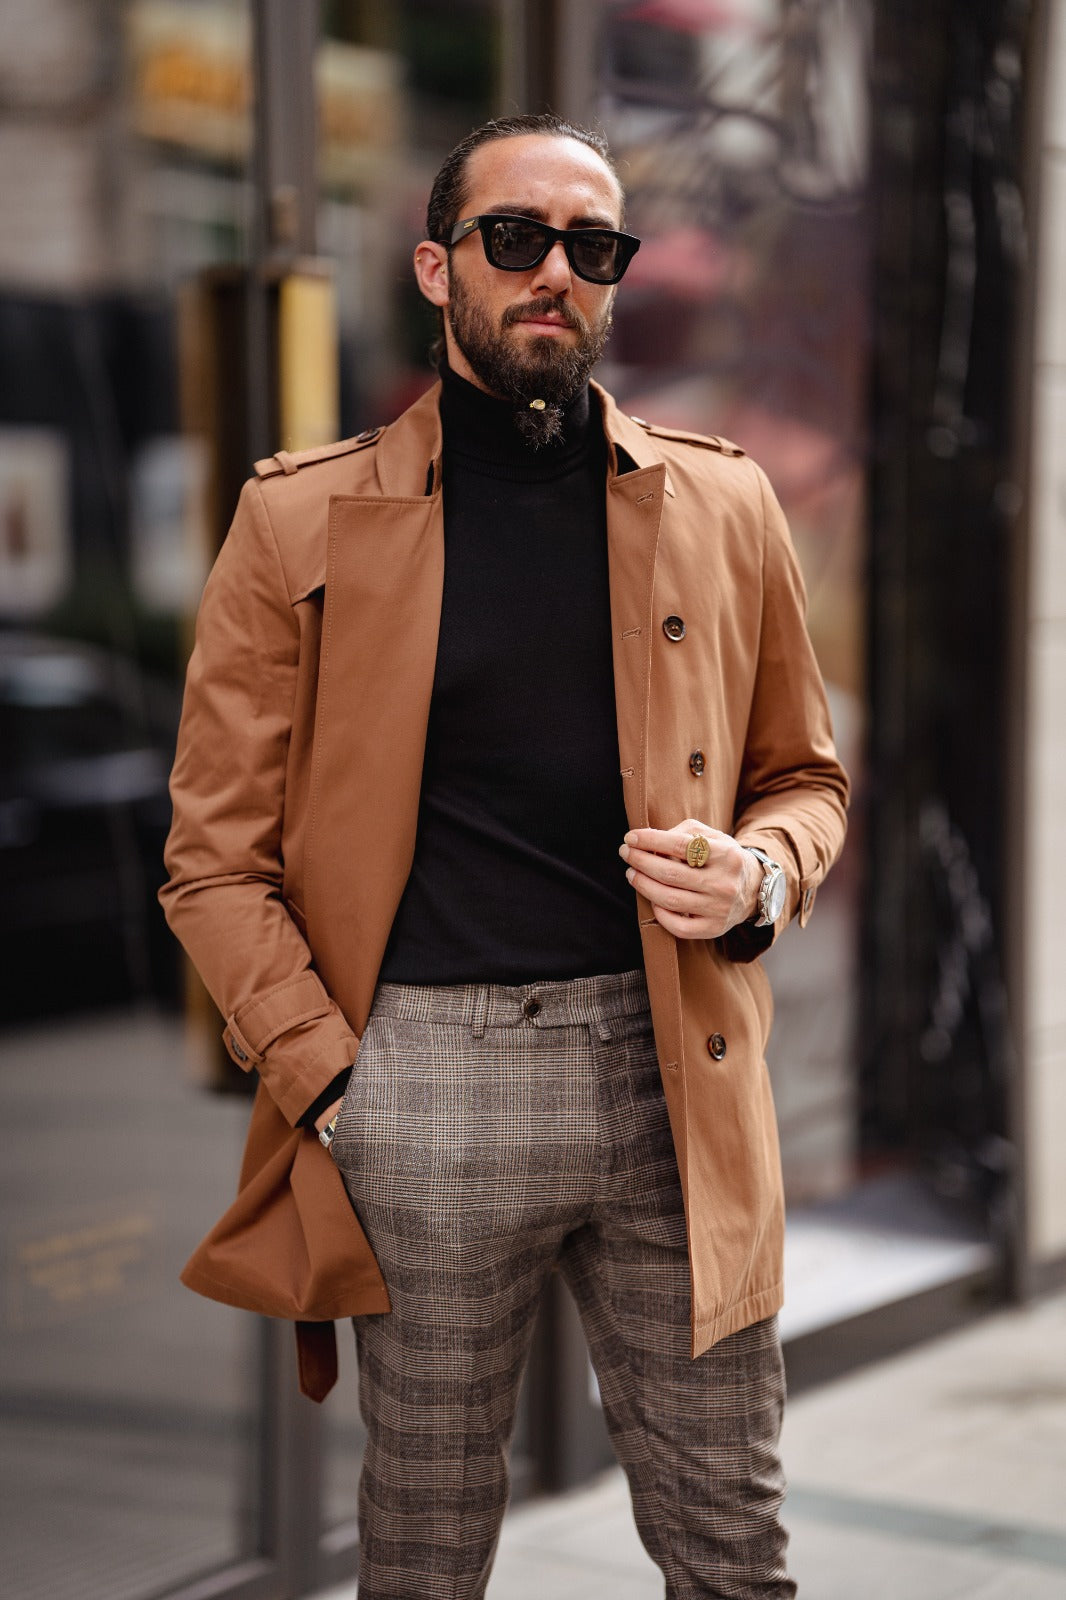 Slim Fit Special Design Wide Collar Trench Coat - Camel